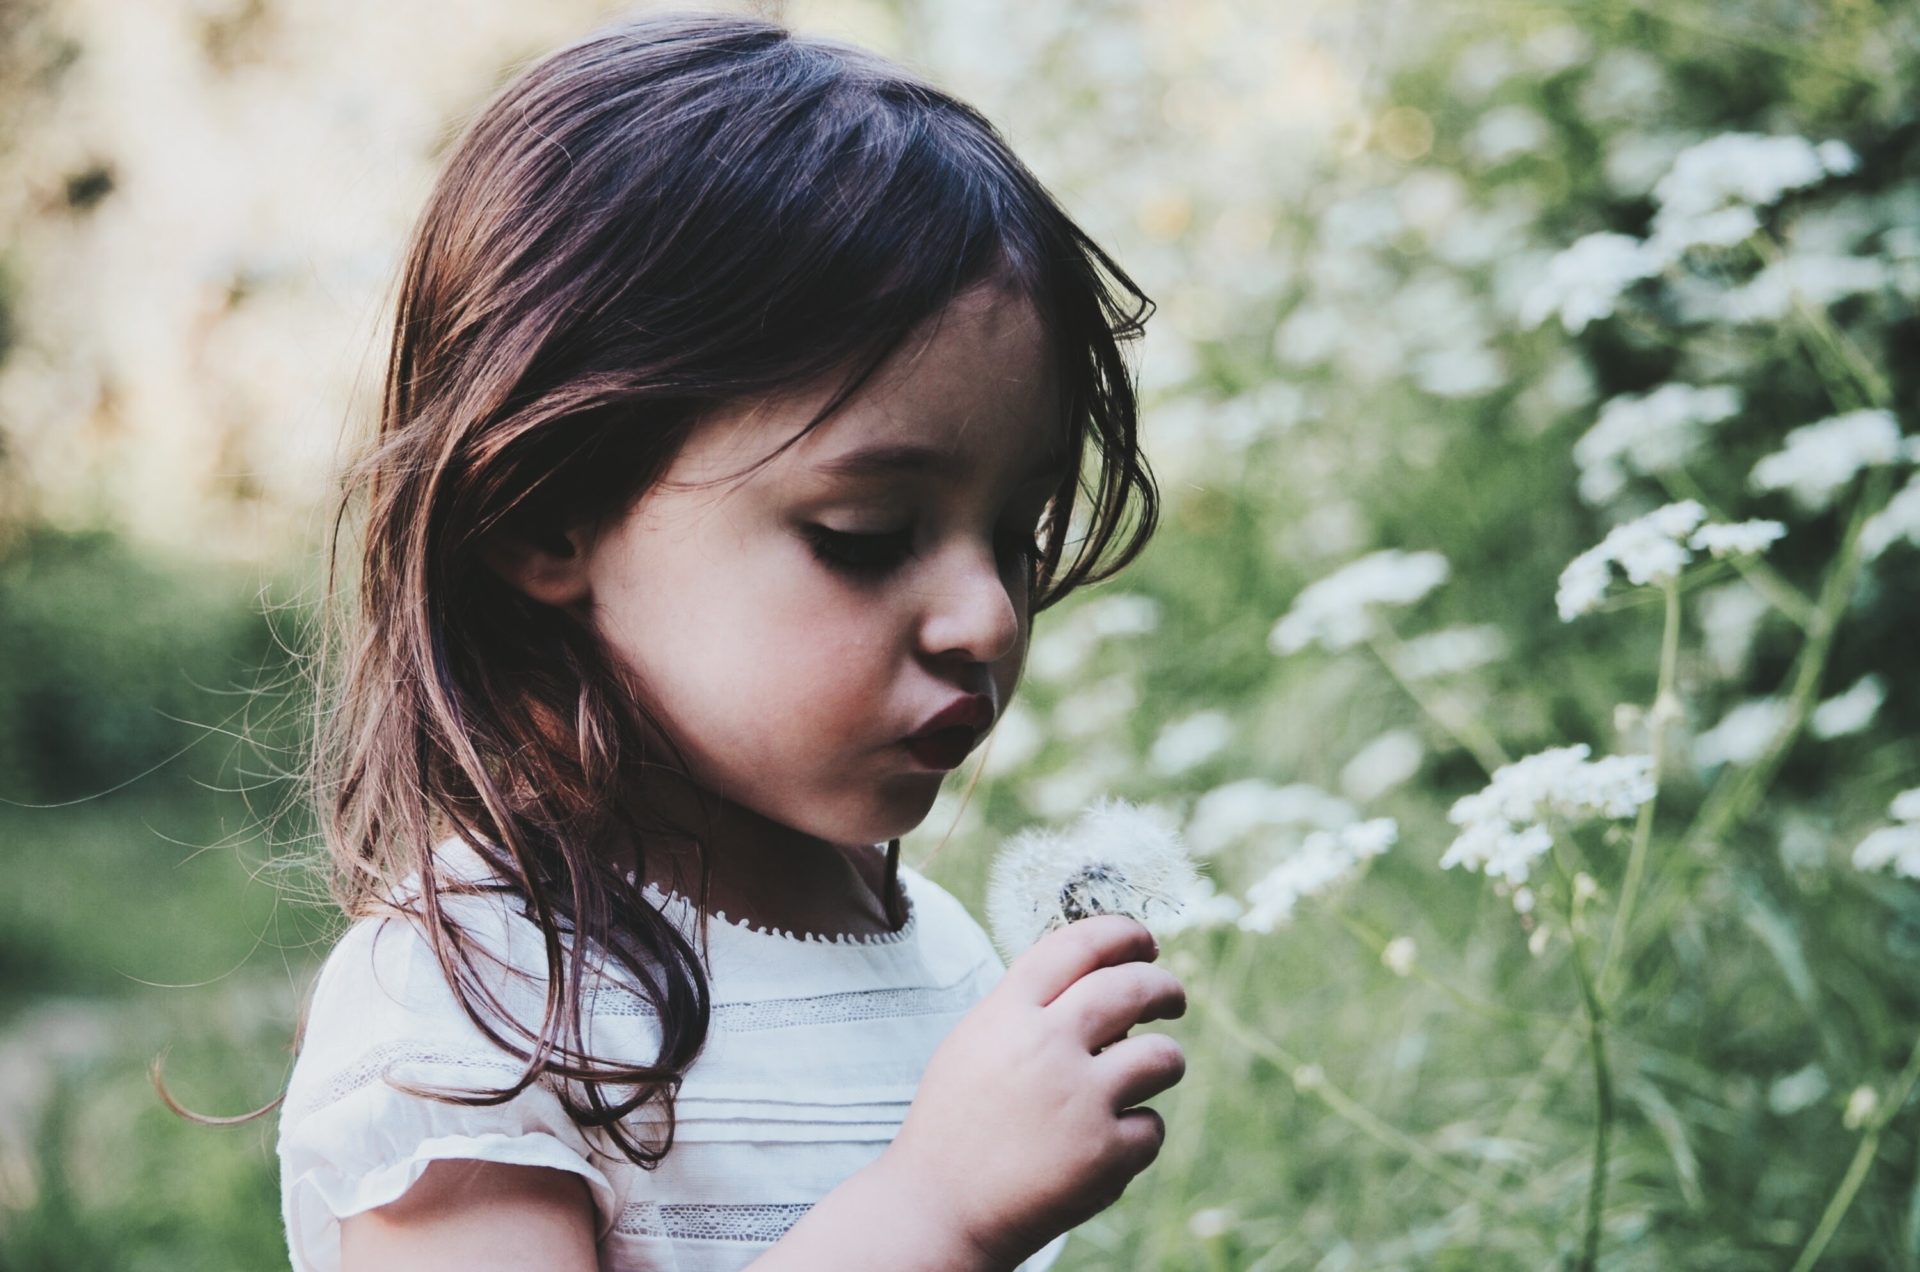 Image of a girl holding a flower